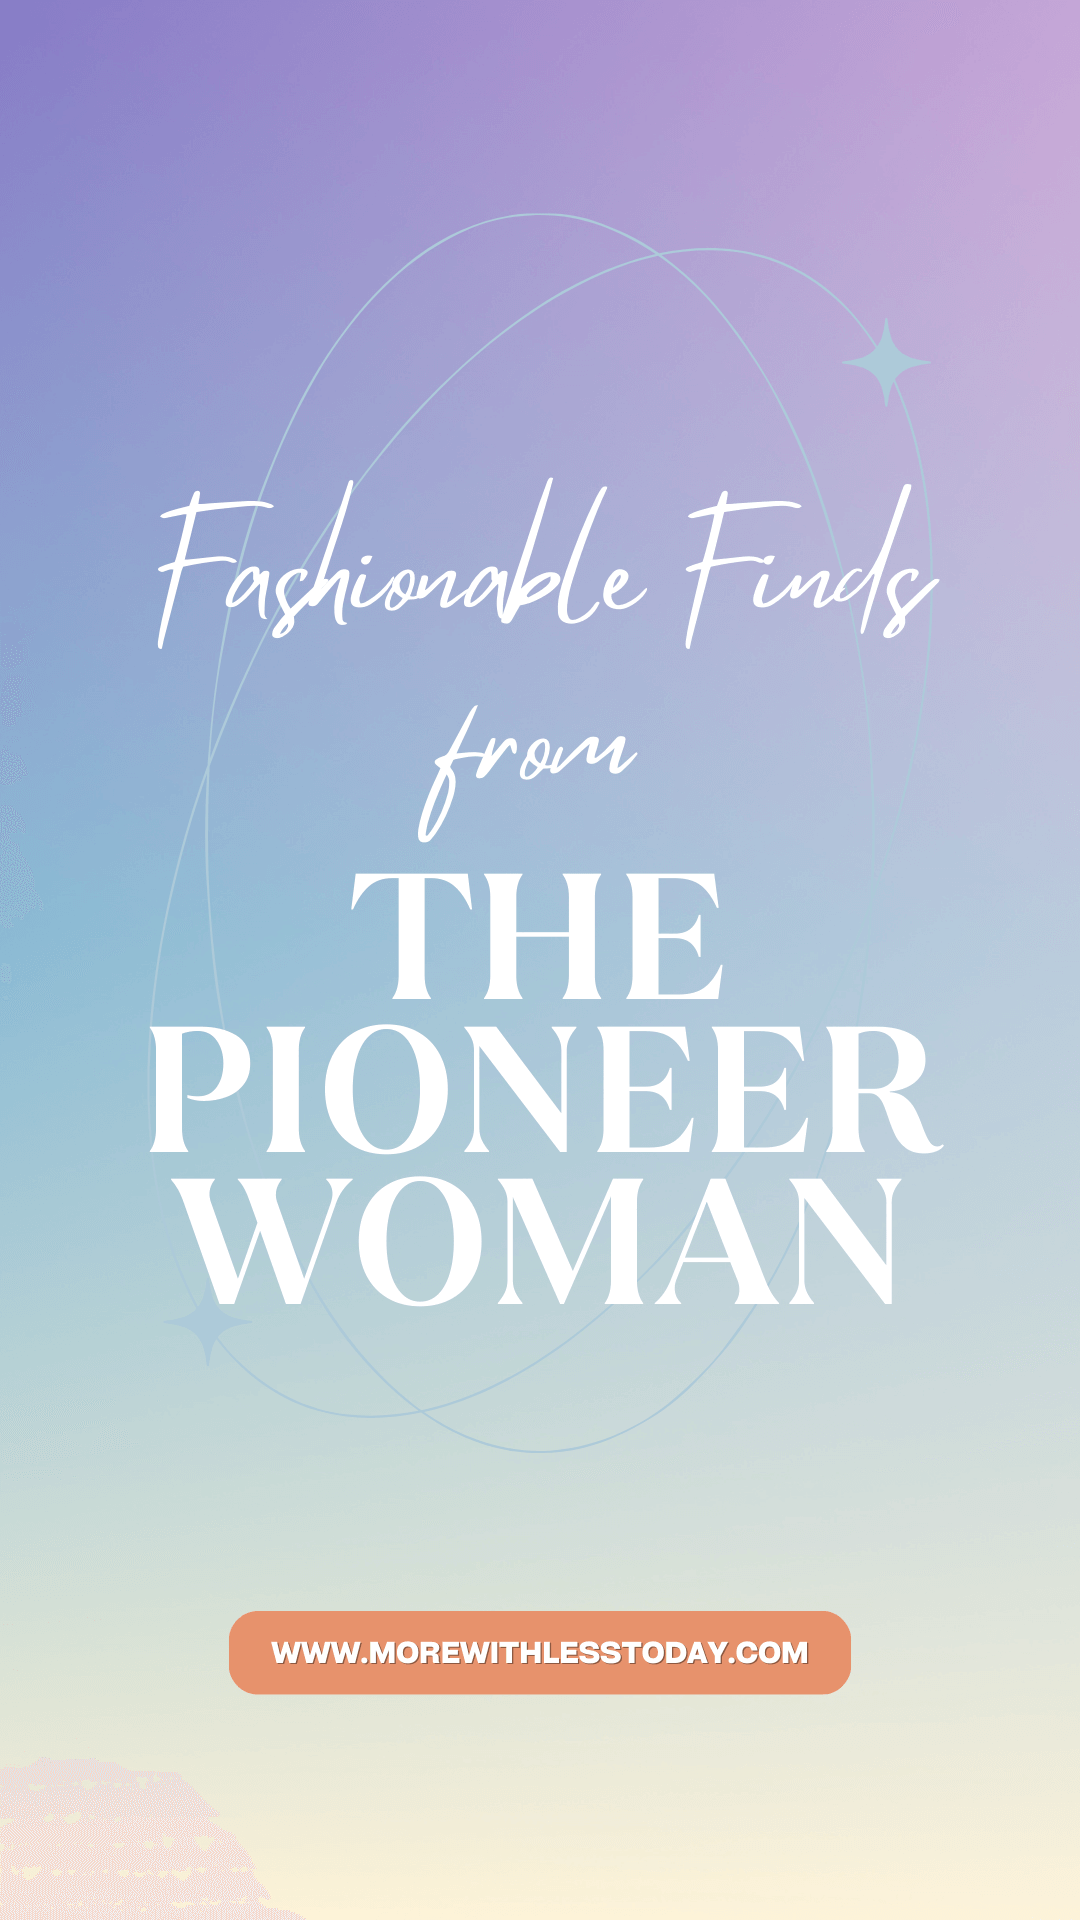 The Pioneer Woman Clothing Line at Walmart - PIN